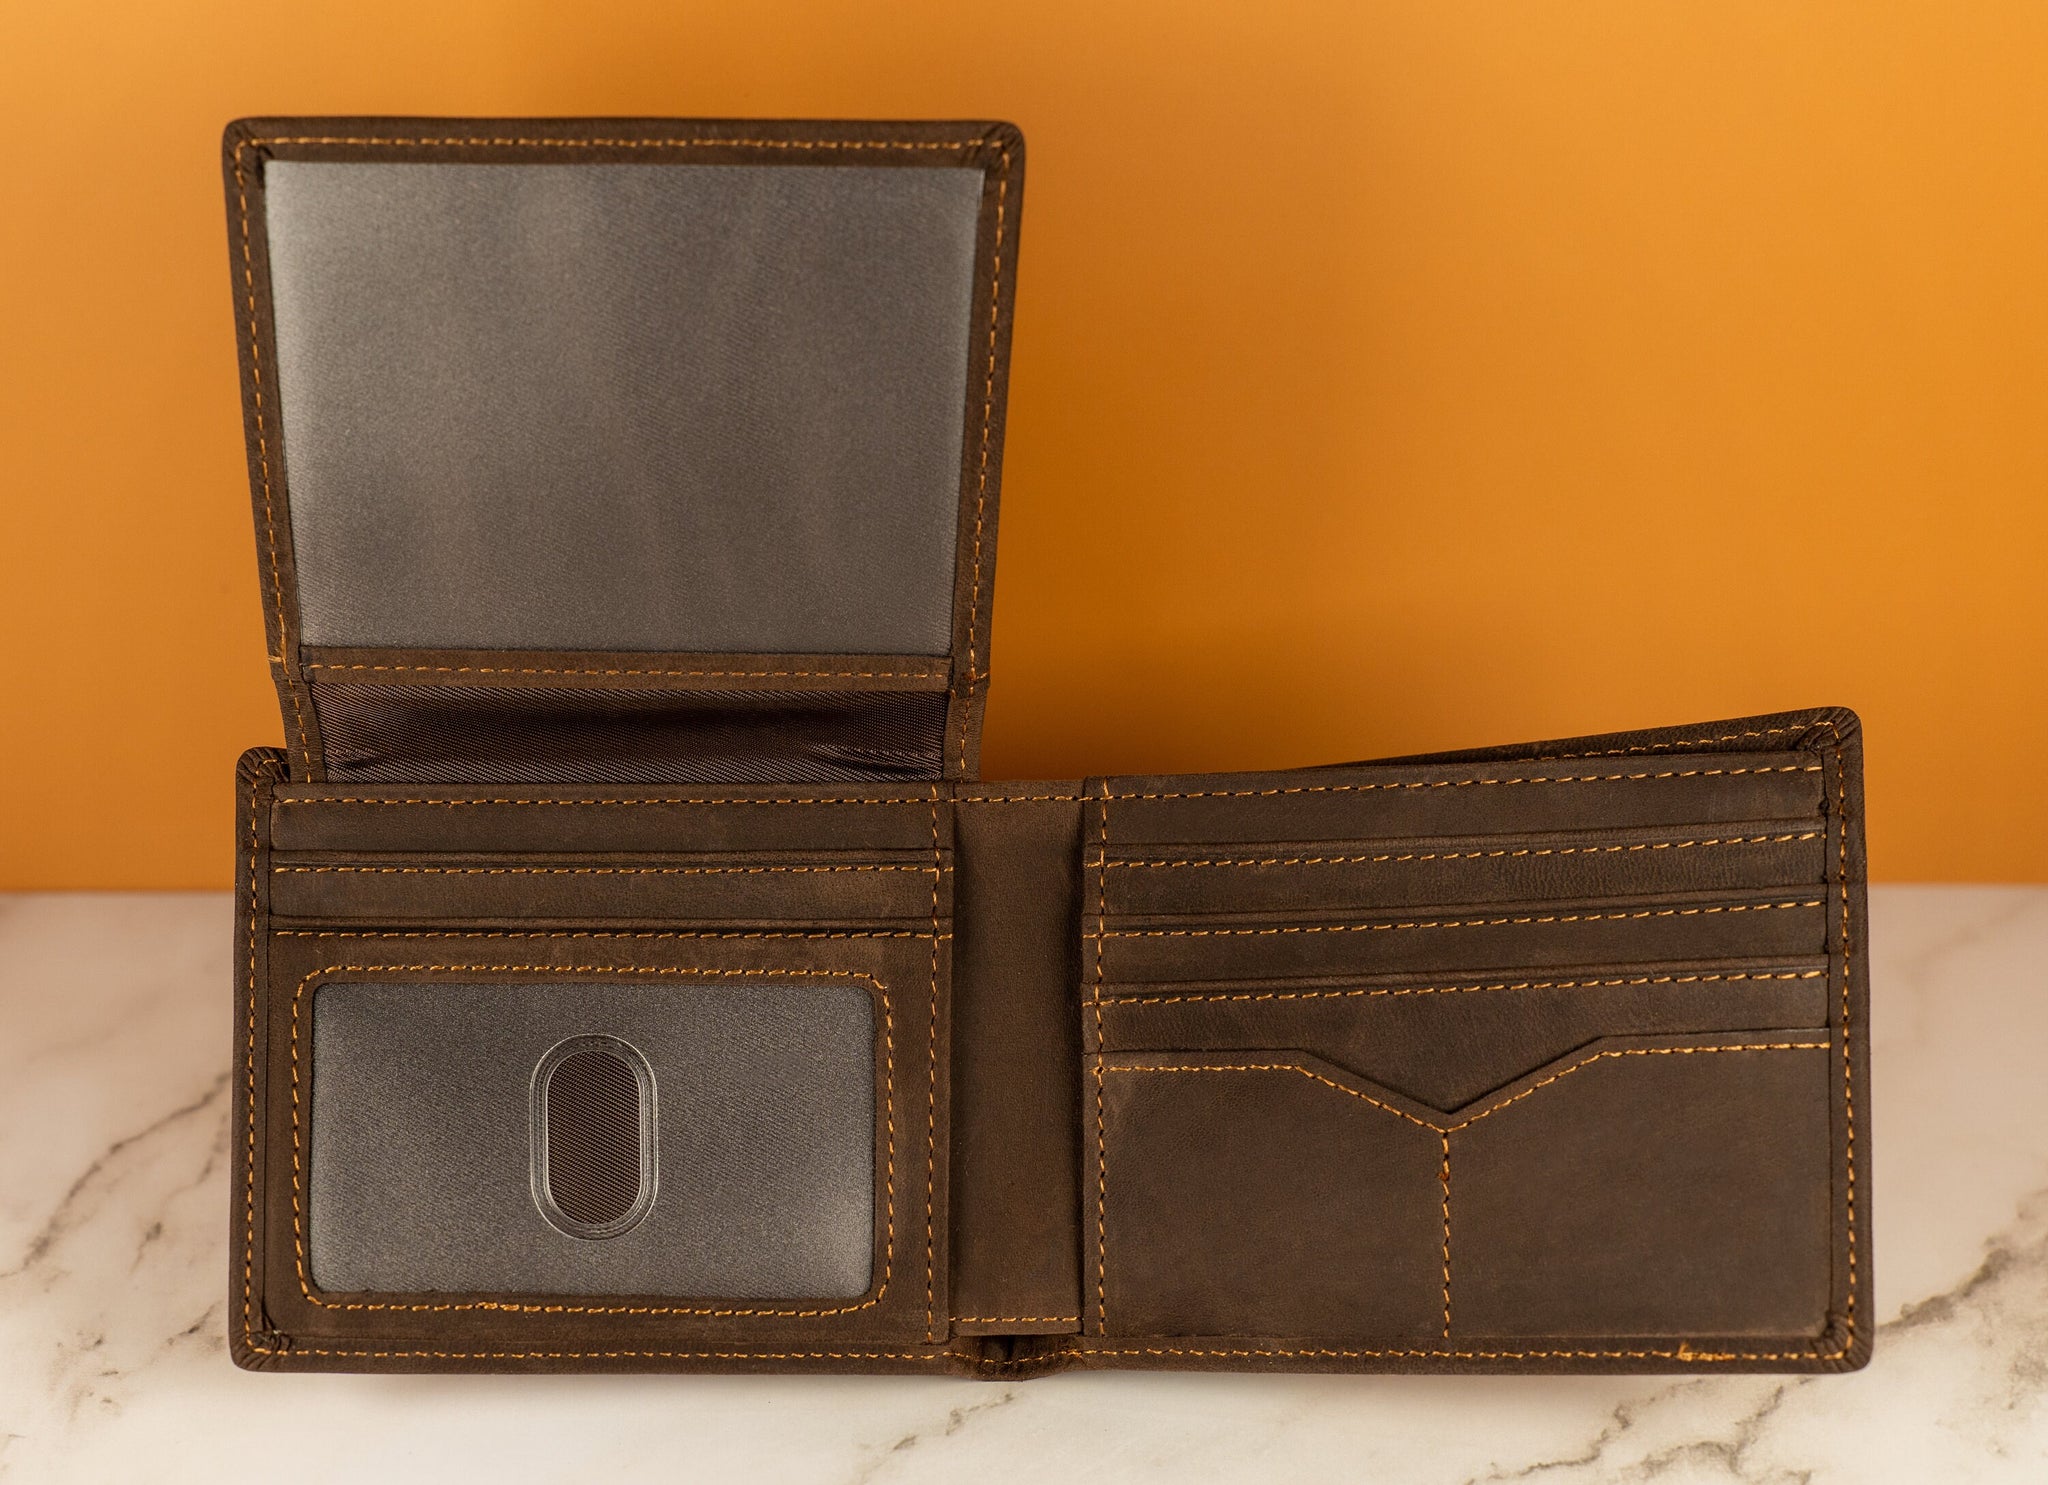 Premium Leather Wallet, Fathers Day Gift, Anniversary Gift